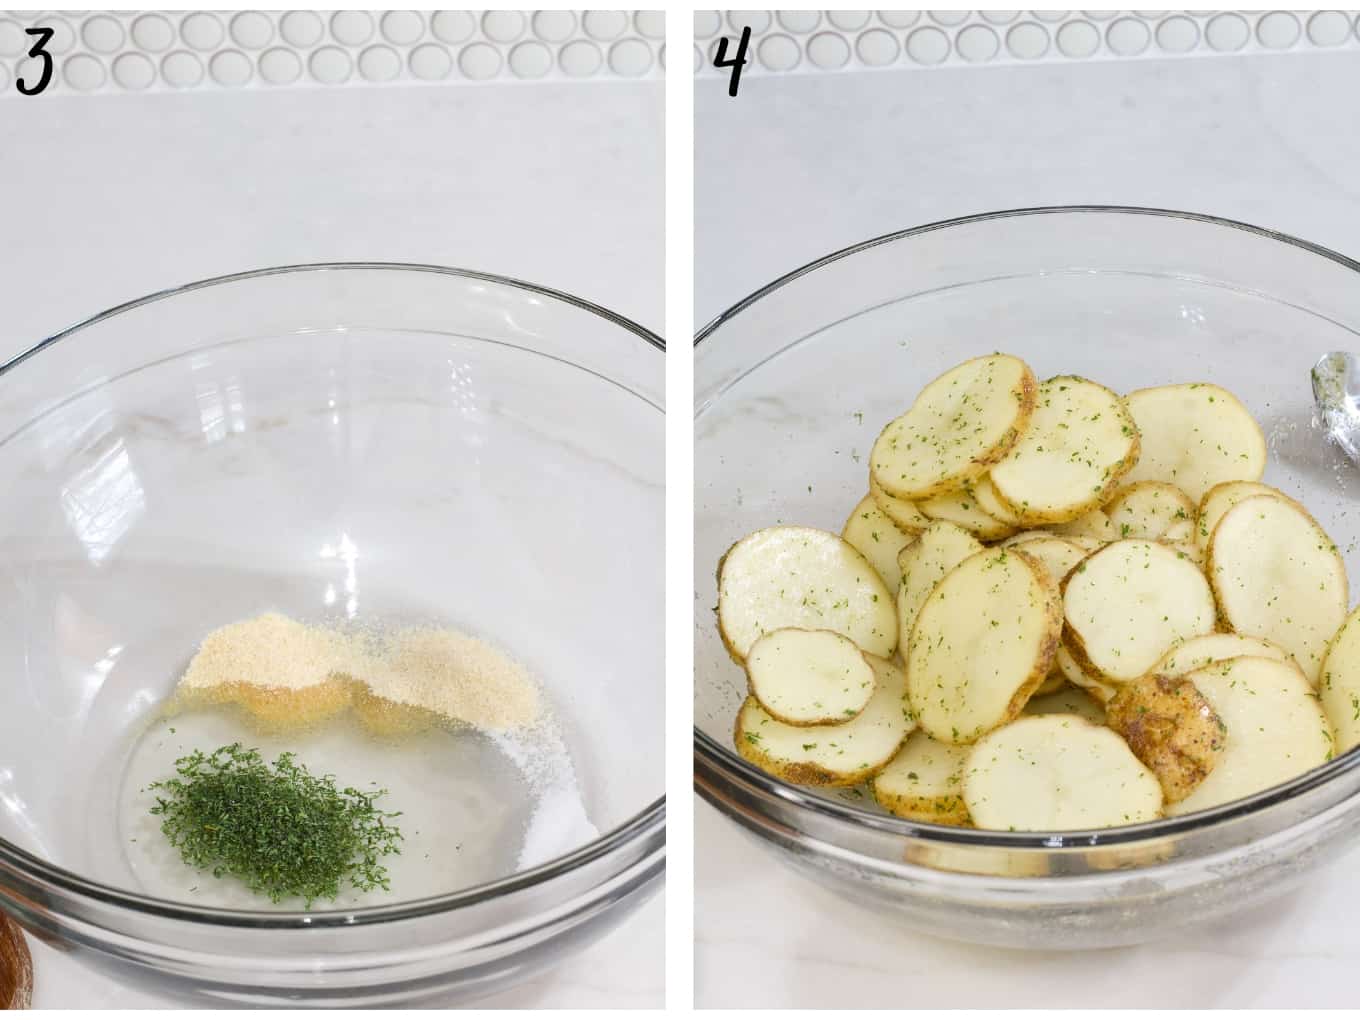 Side by side images of the spices in the bowl, without and with the sliced potatoes in it.